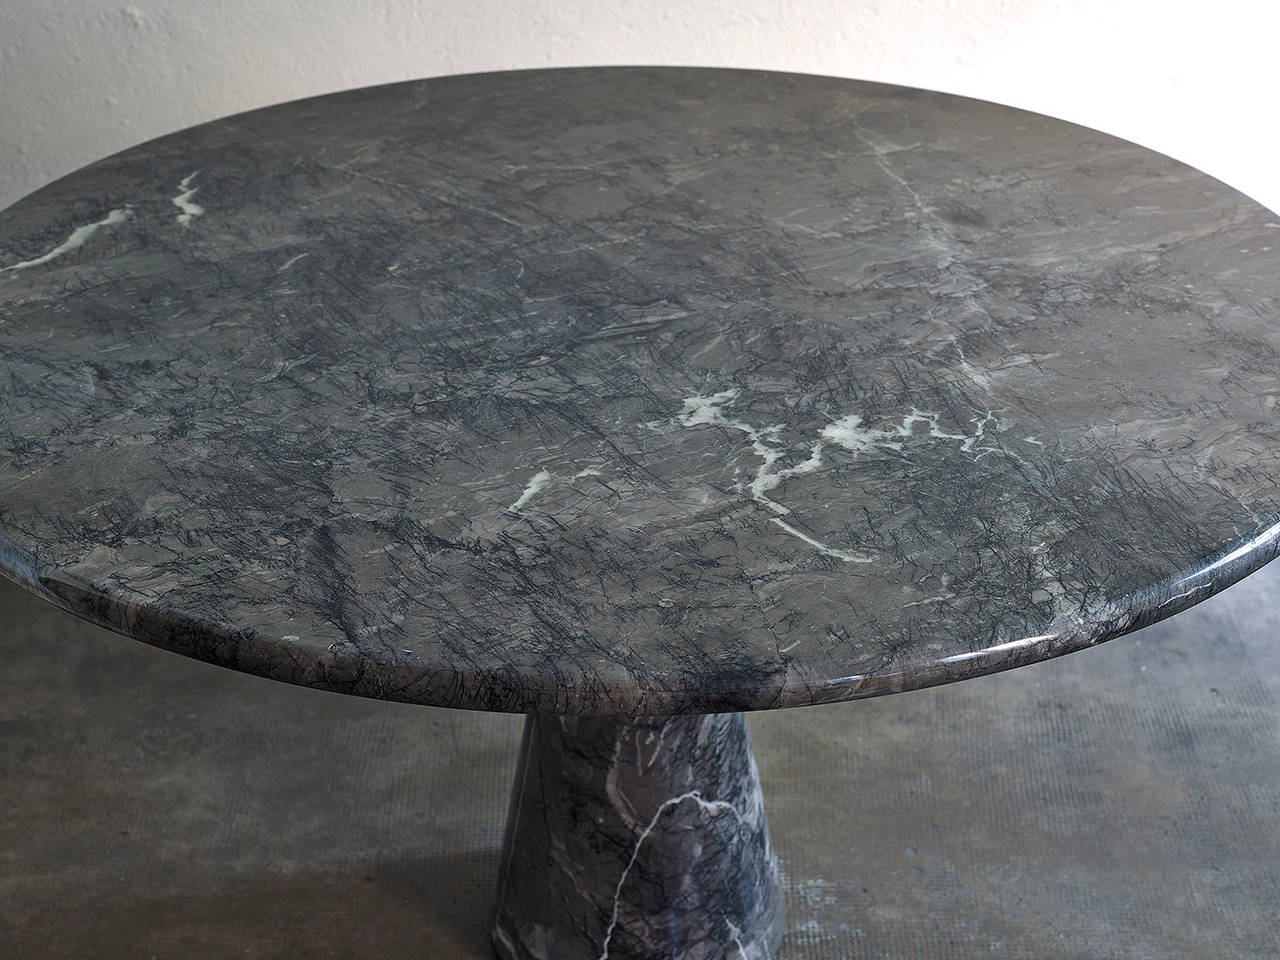 Large dining table by Angelo Mangiarotti in dark grey marble with beautiful black and white veins.

This iconic table clearly discloses the sculptural knowledge of Angelo Mangiarotti. Its minimalistic shapes are entirely made of 